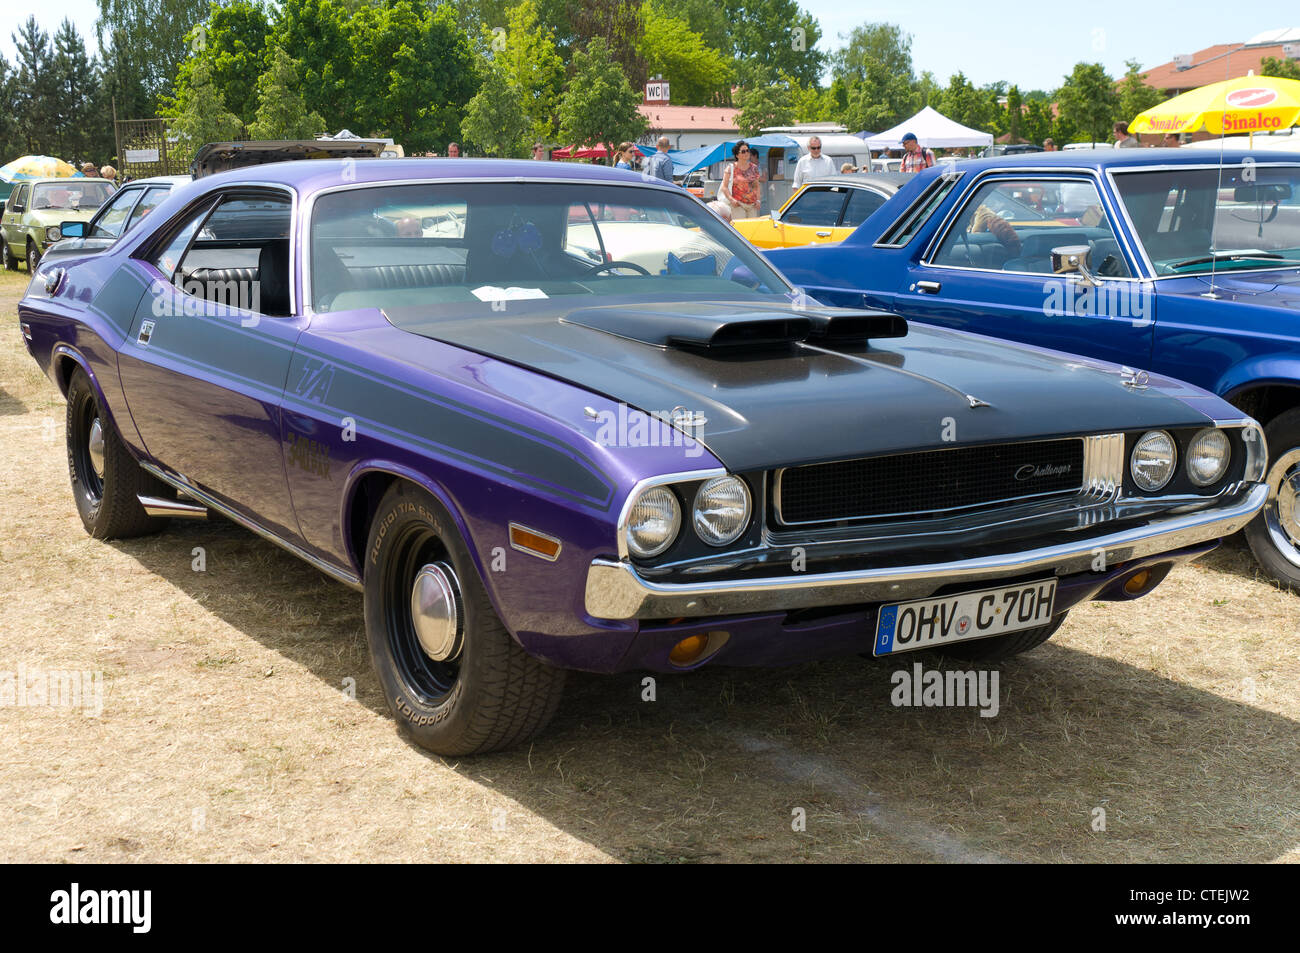 Car Dodge Challenger coupe Stock Photo